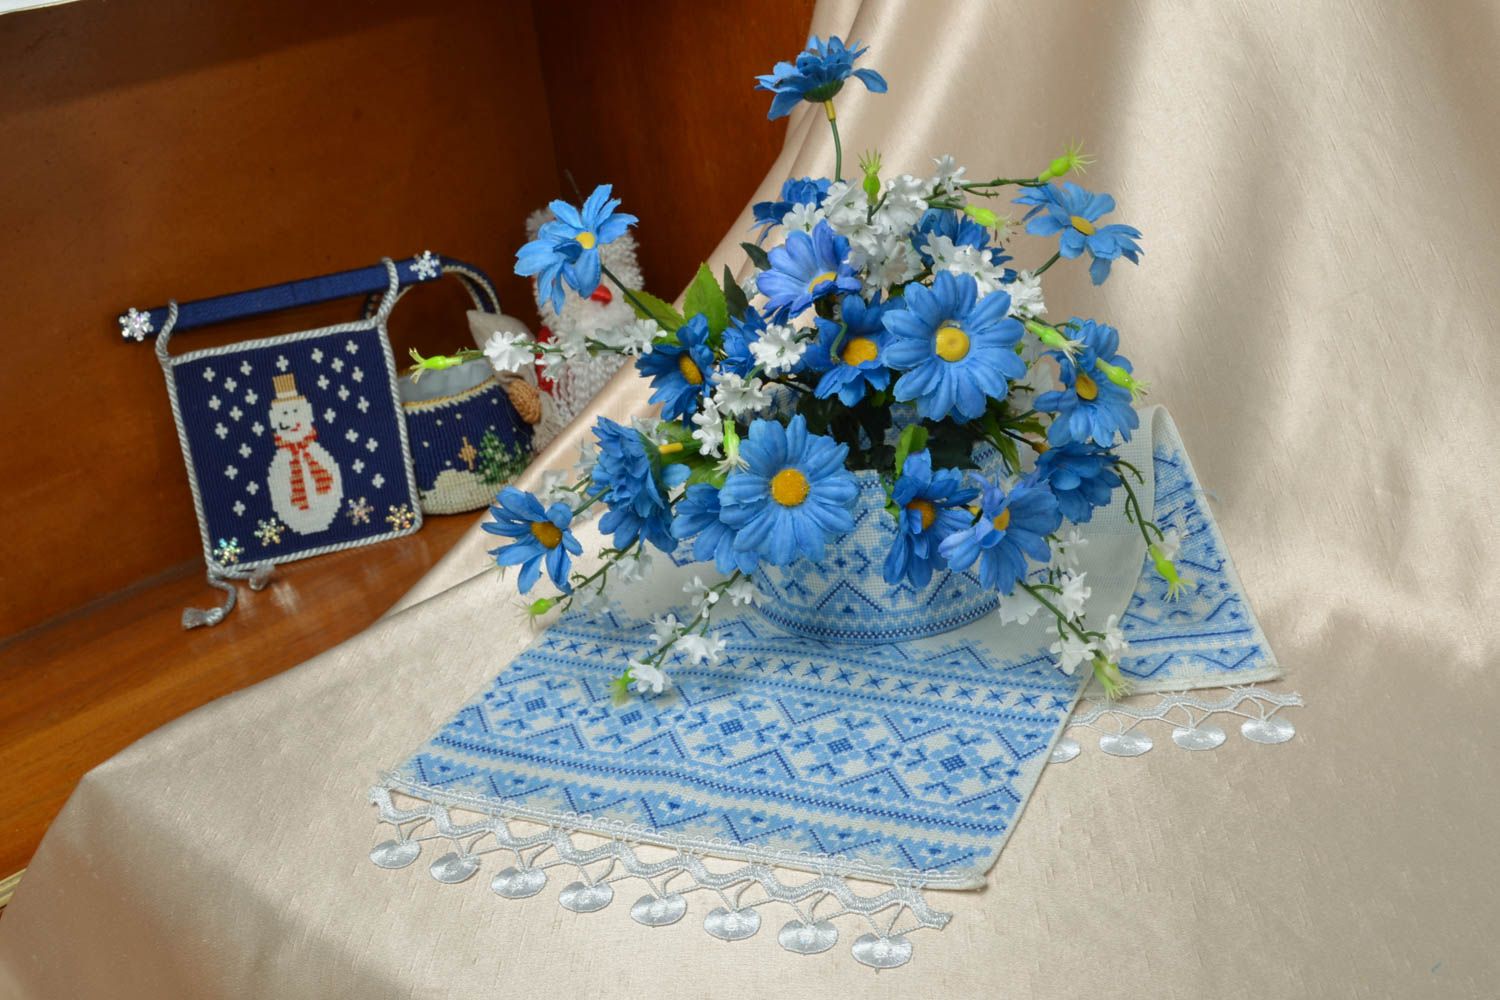 Cross-stitched table runner and decorative basket photo 5